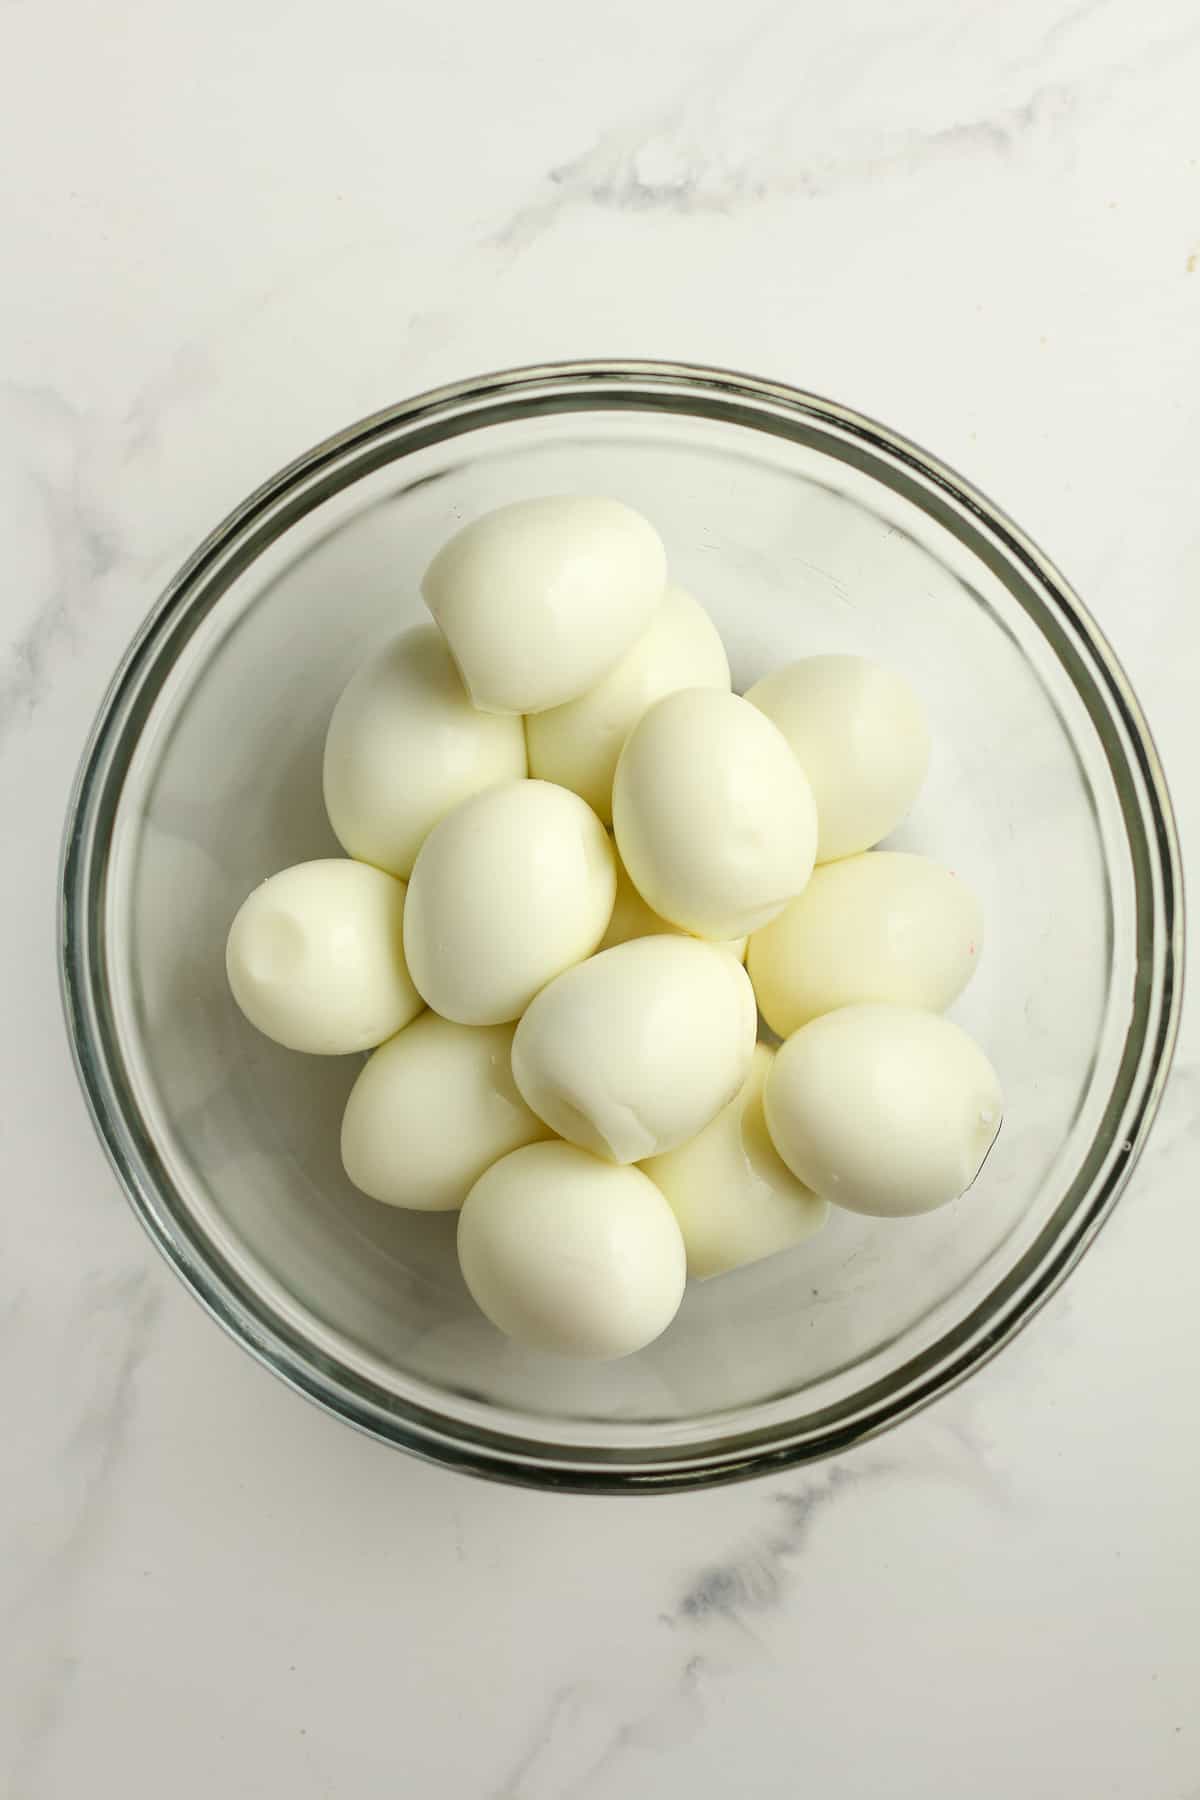 A bowl of cooked hard boiled eggs.